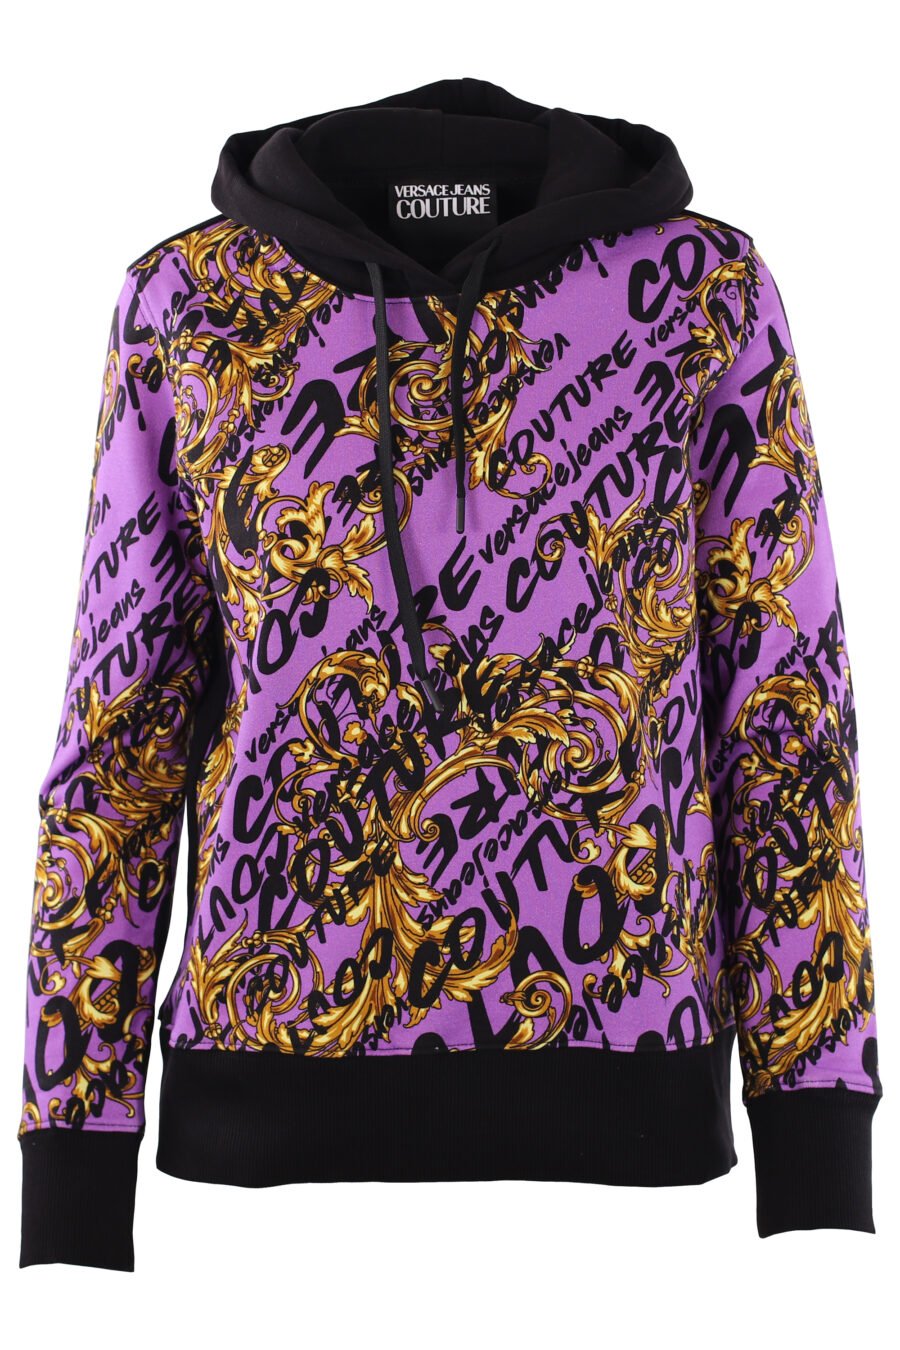 Purple hooded sweatshirt "all over logo" with gold details - IMG 0283